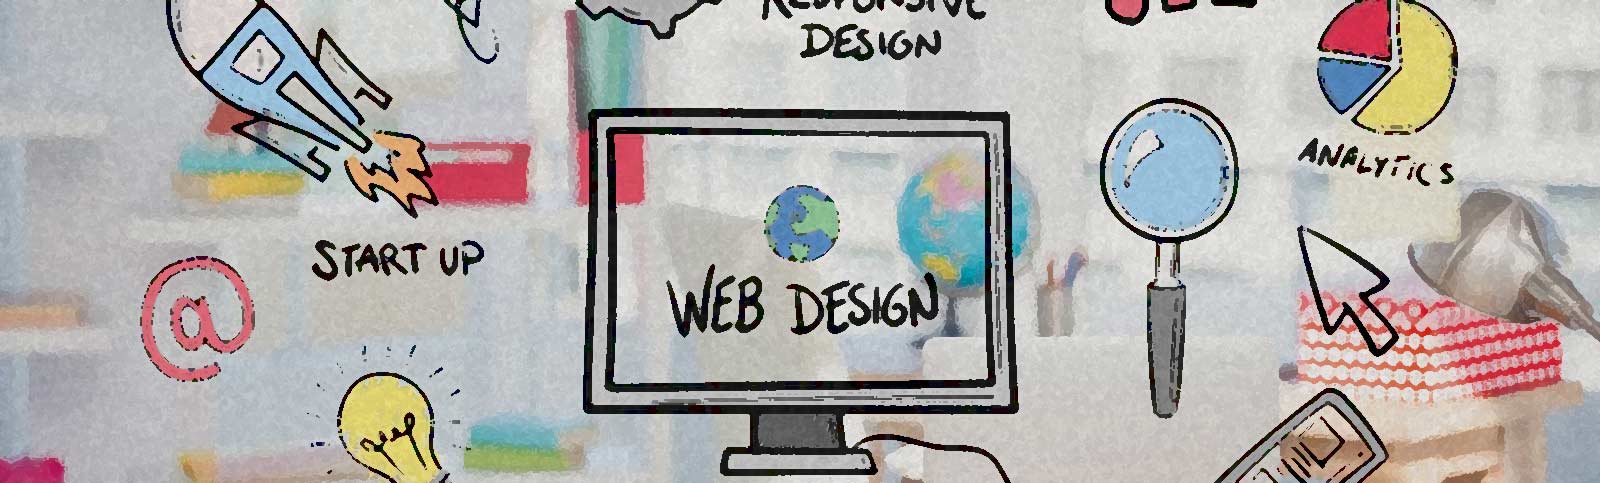 Hire Professionals to Develop and Manage Your Website